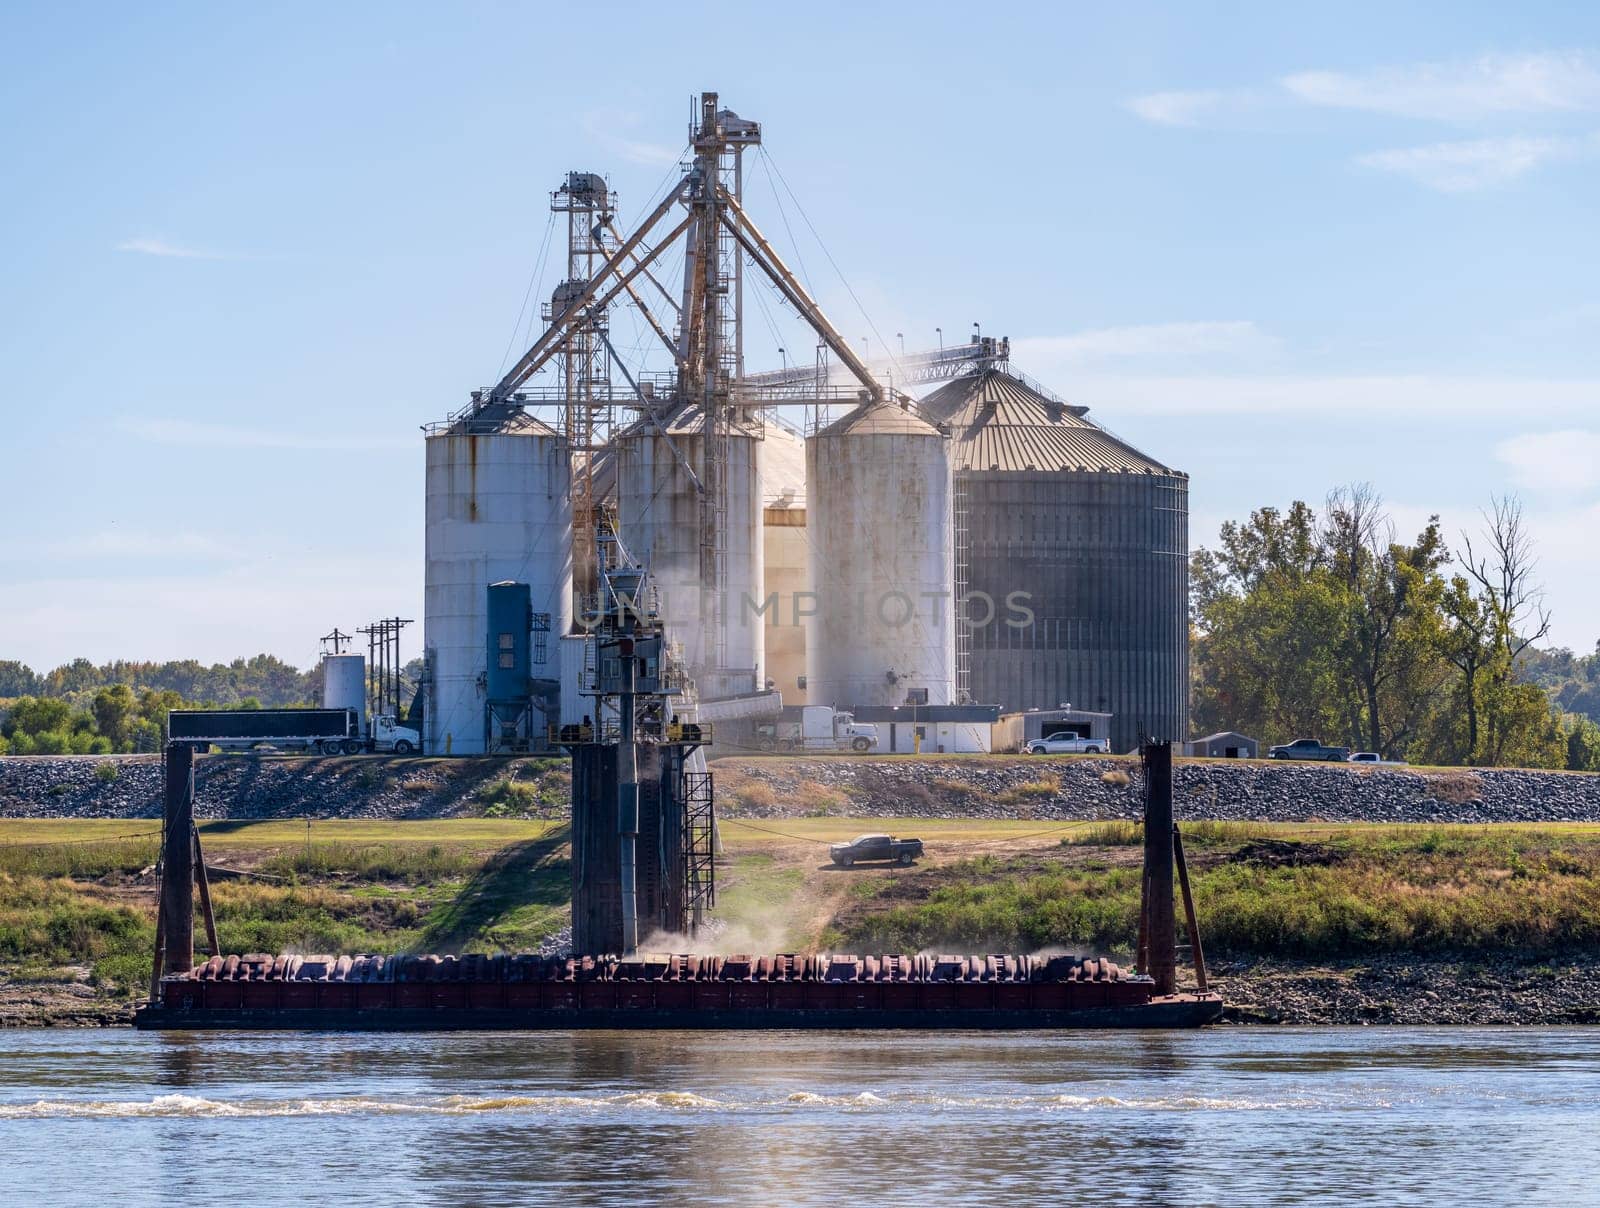 Grain being loaded into freight barges on lower Mississippi river by steheap